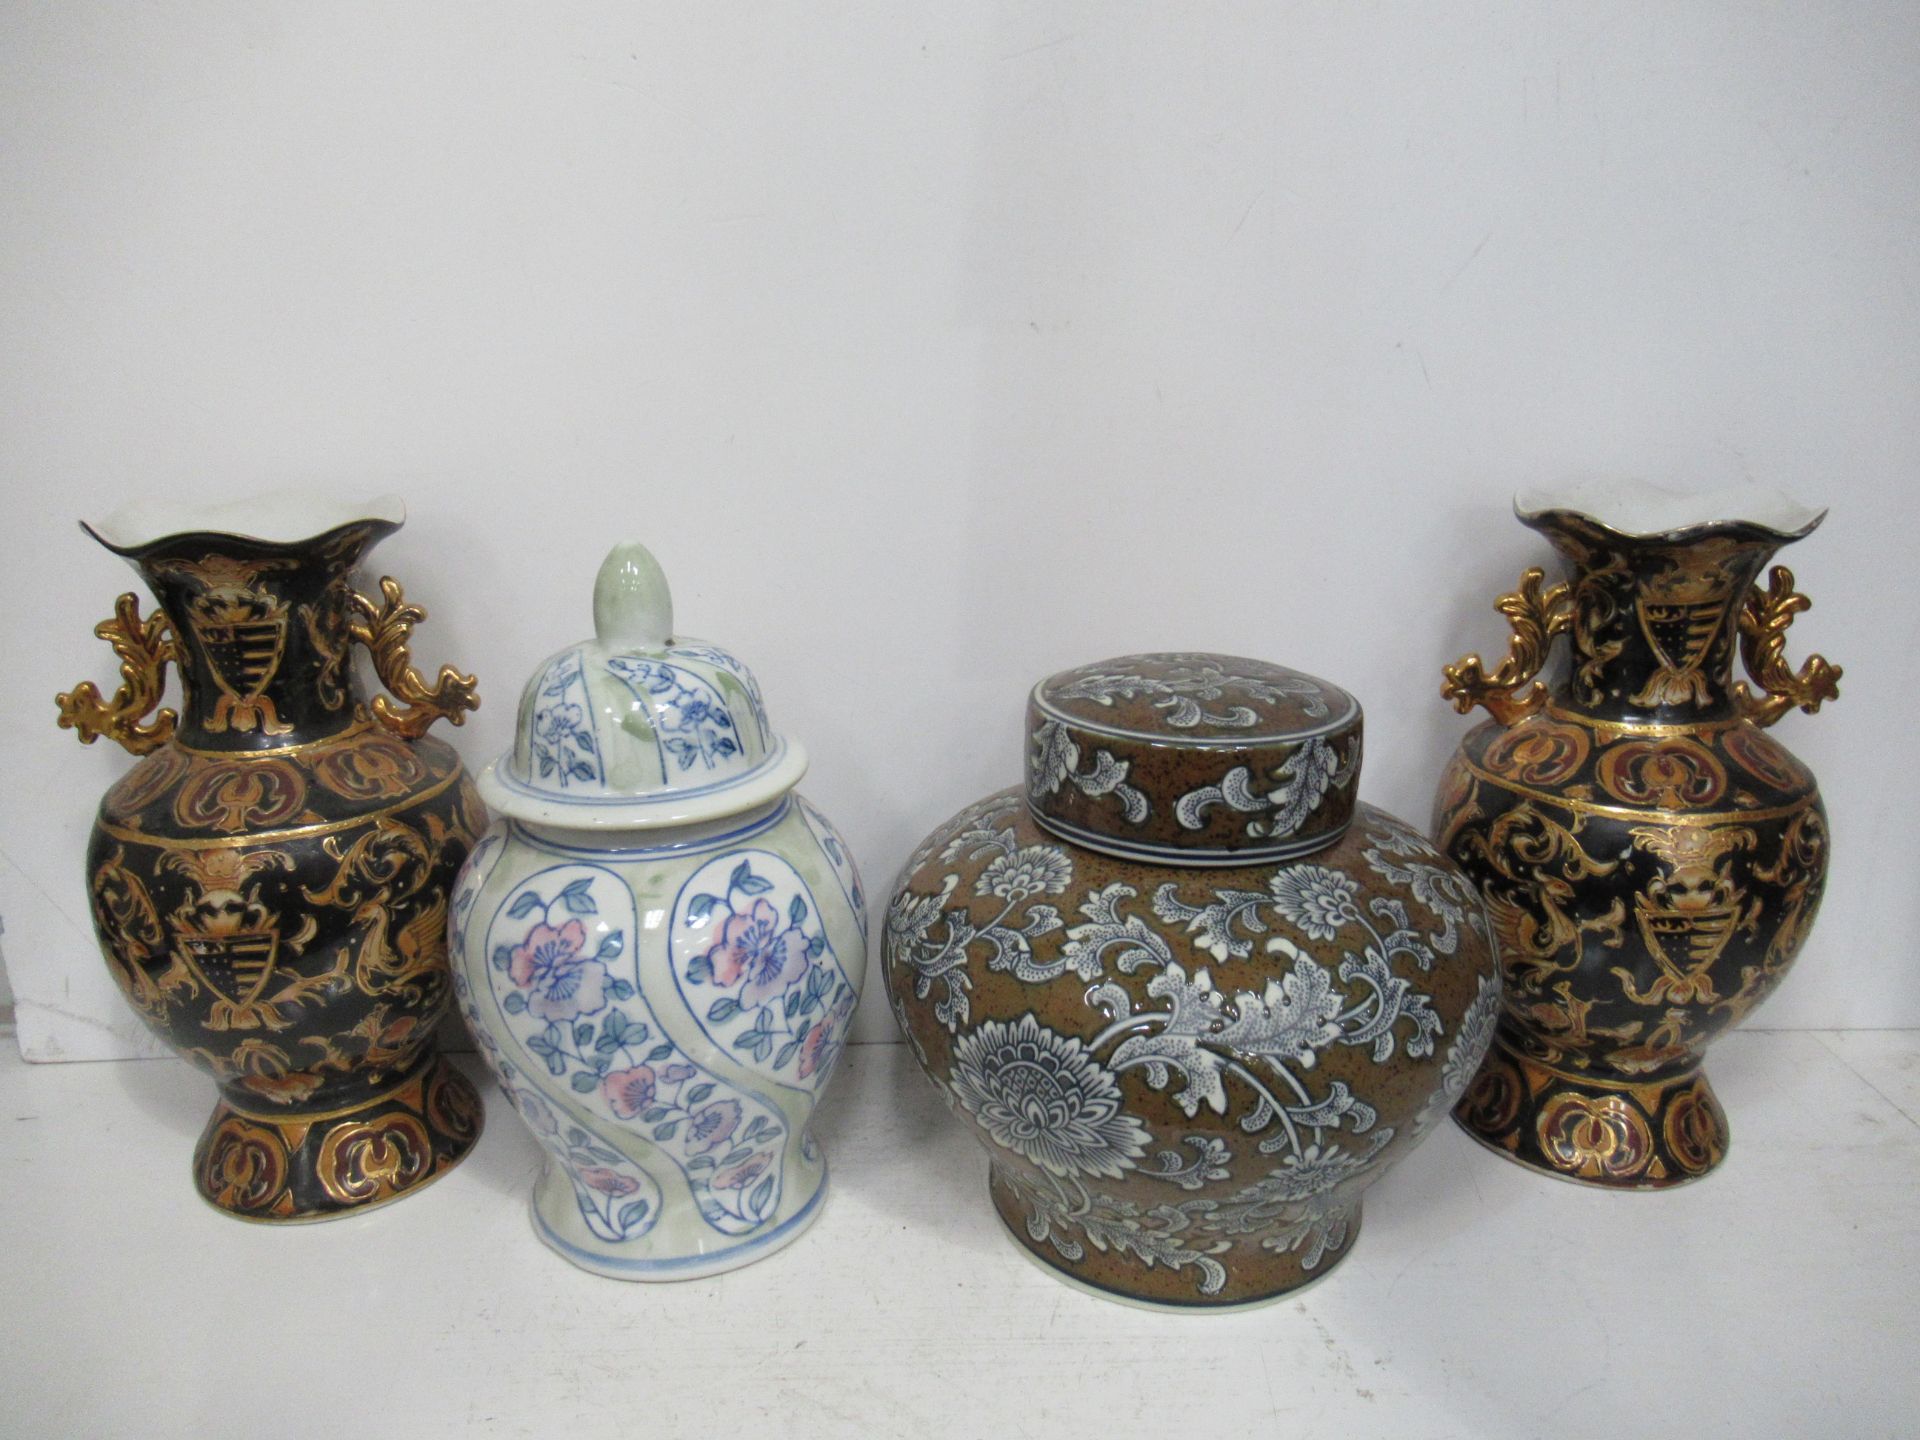 Two Chinese Black and Orange Vases together with two Urns (27cm vase/23cm urns)